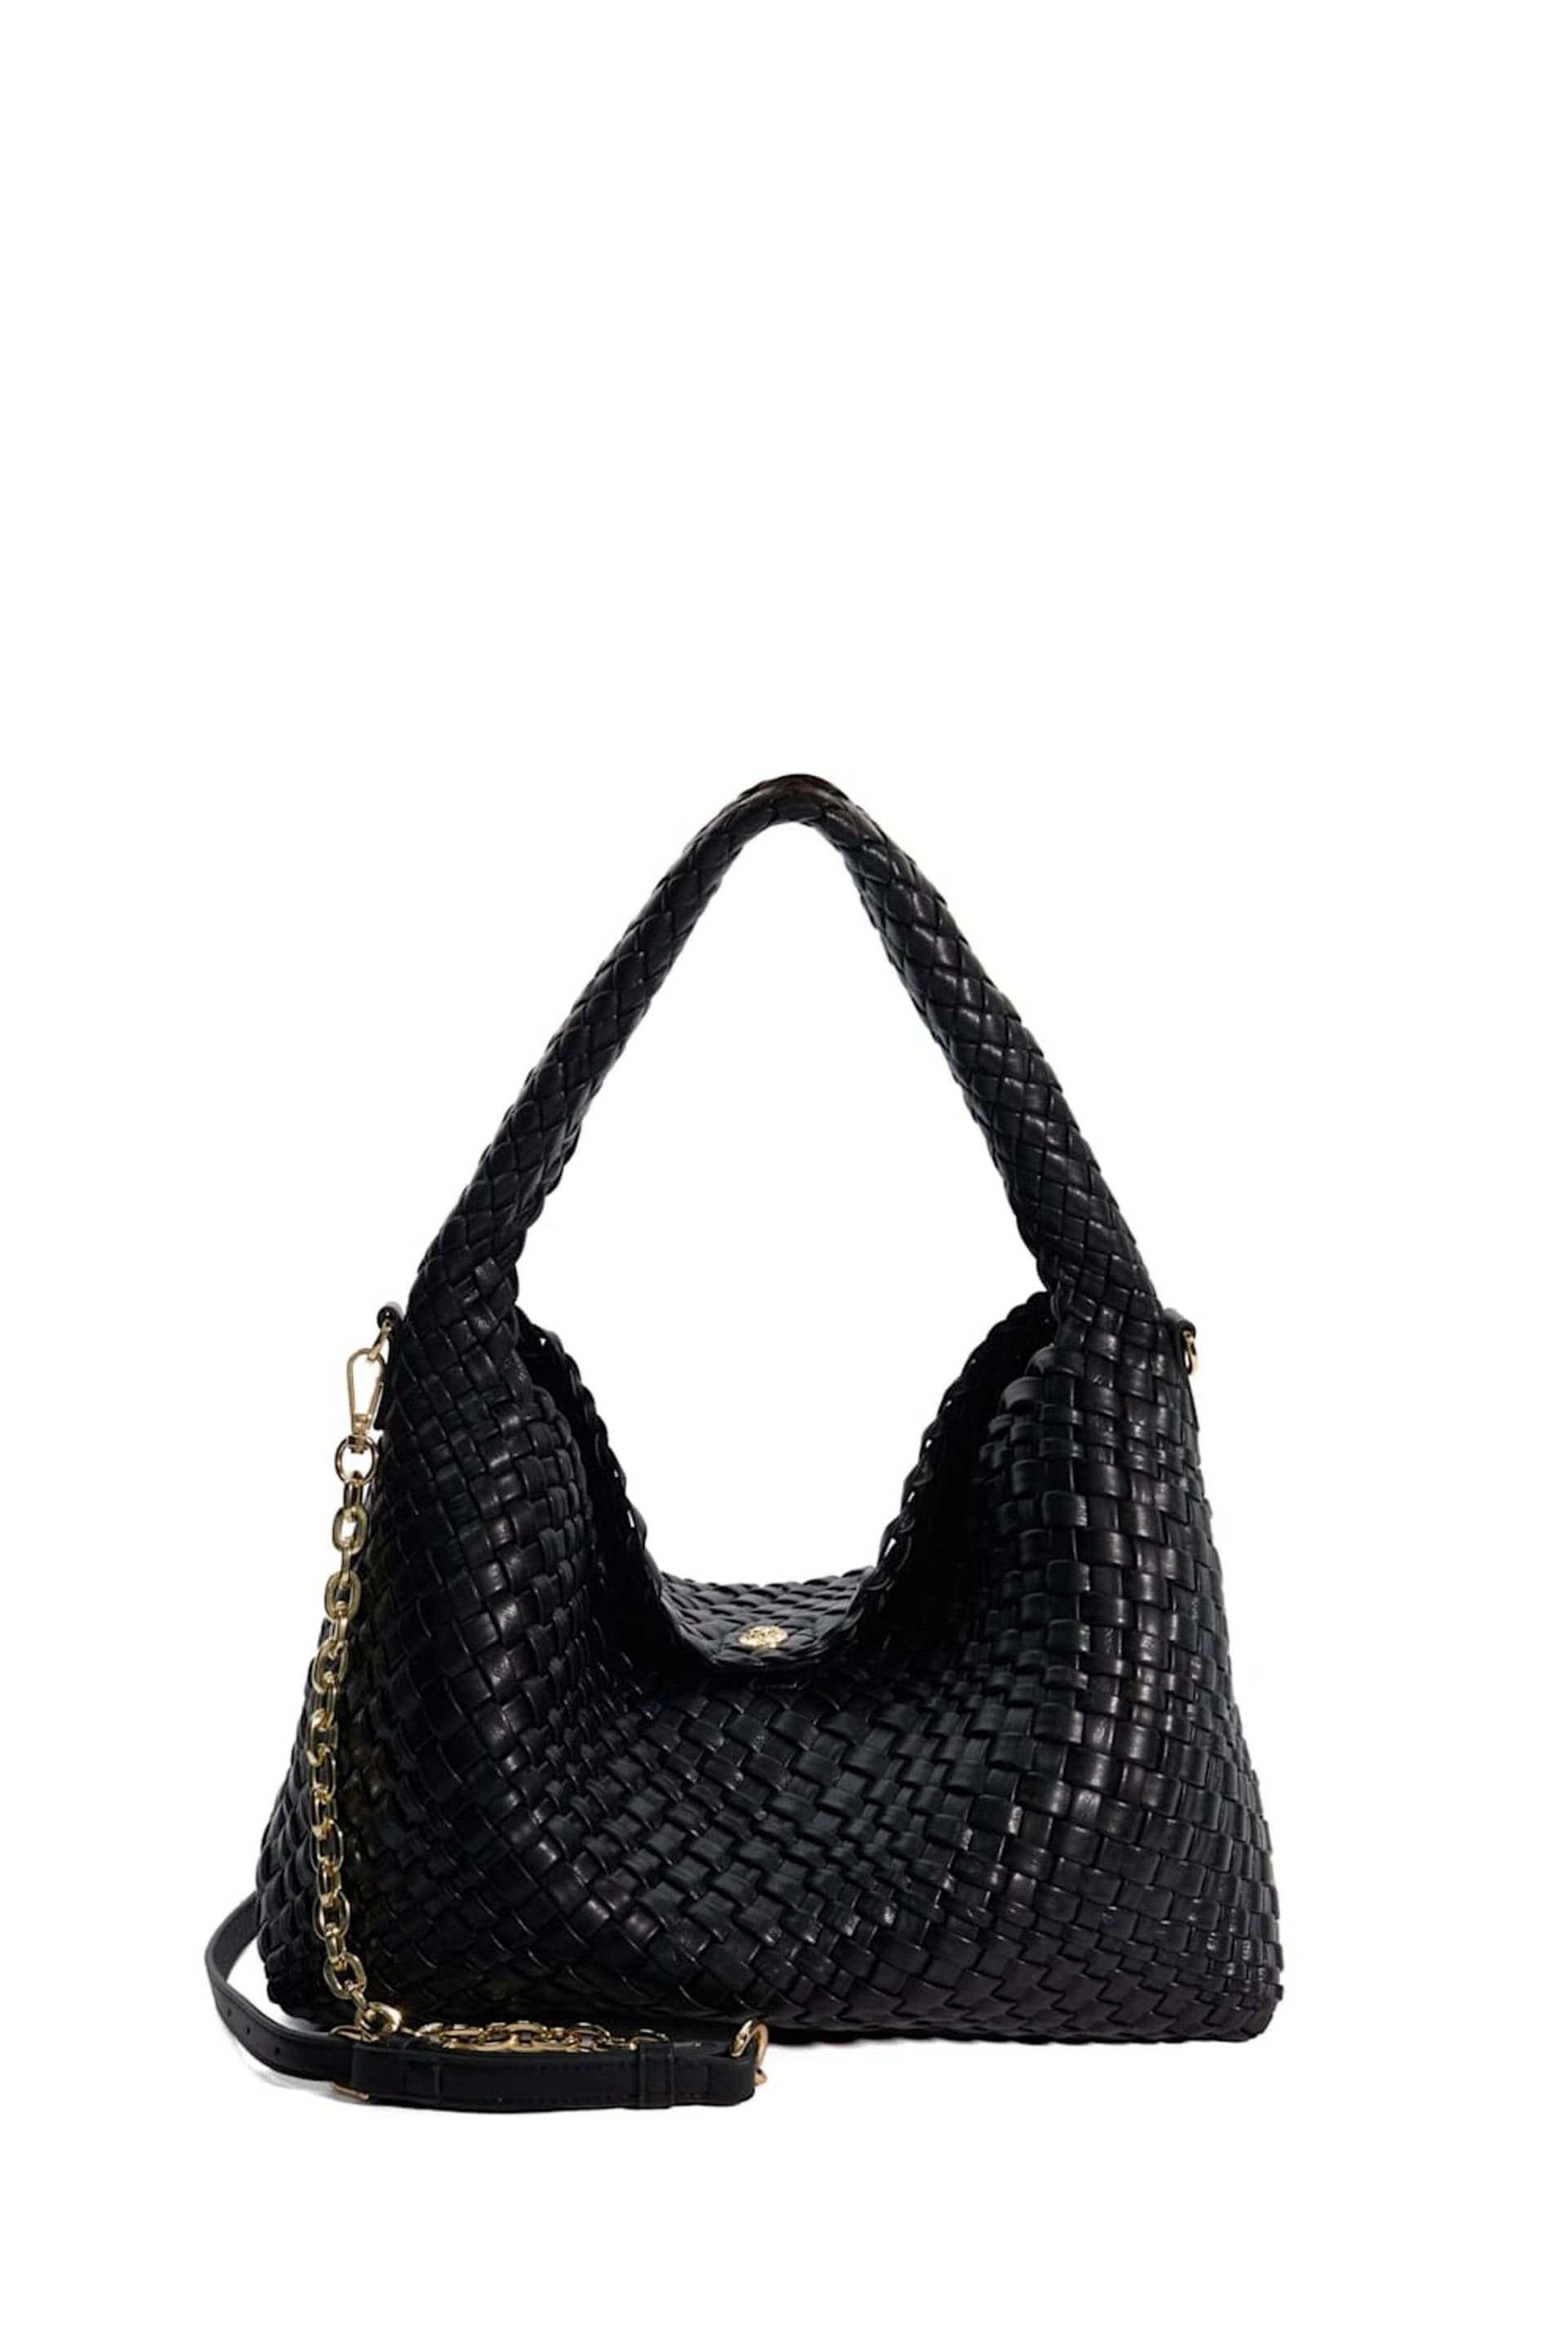 Dune London Black Large Deliberate Woven Slouch Bag - Image 3 of 7